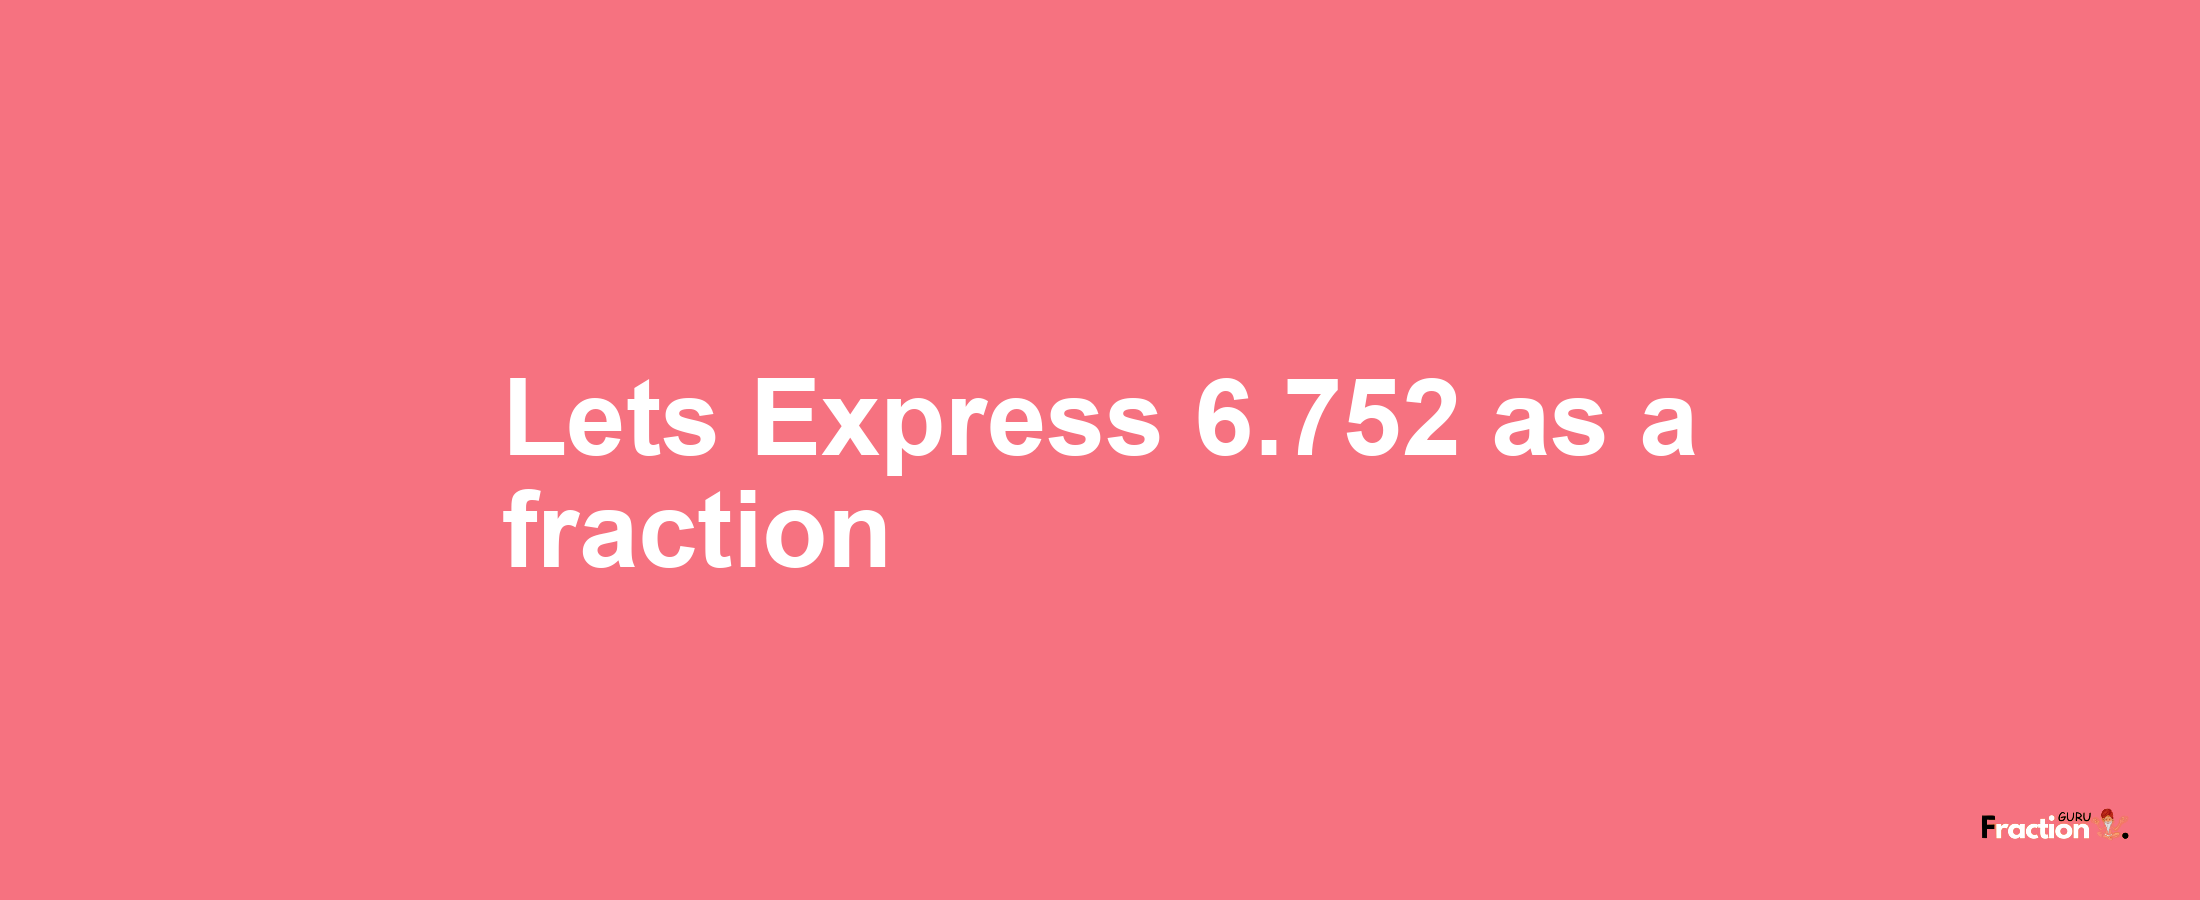 Lets Express 6.752 as afraction